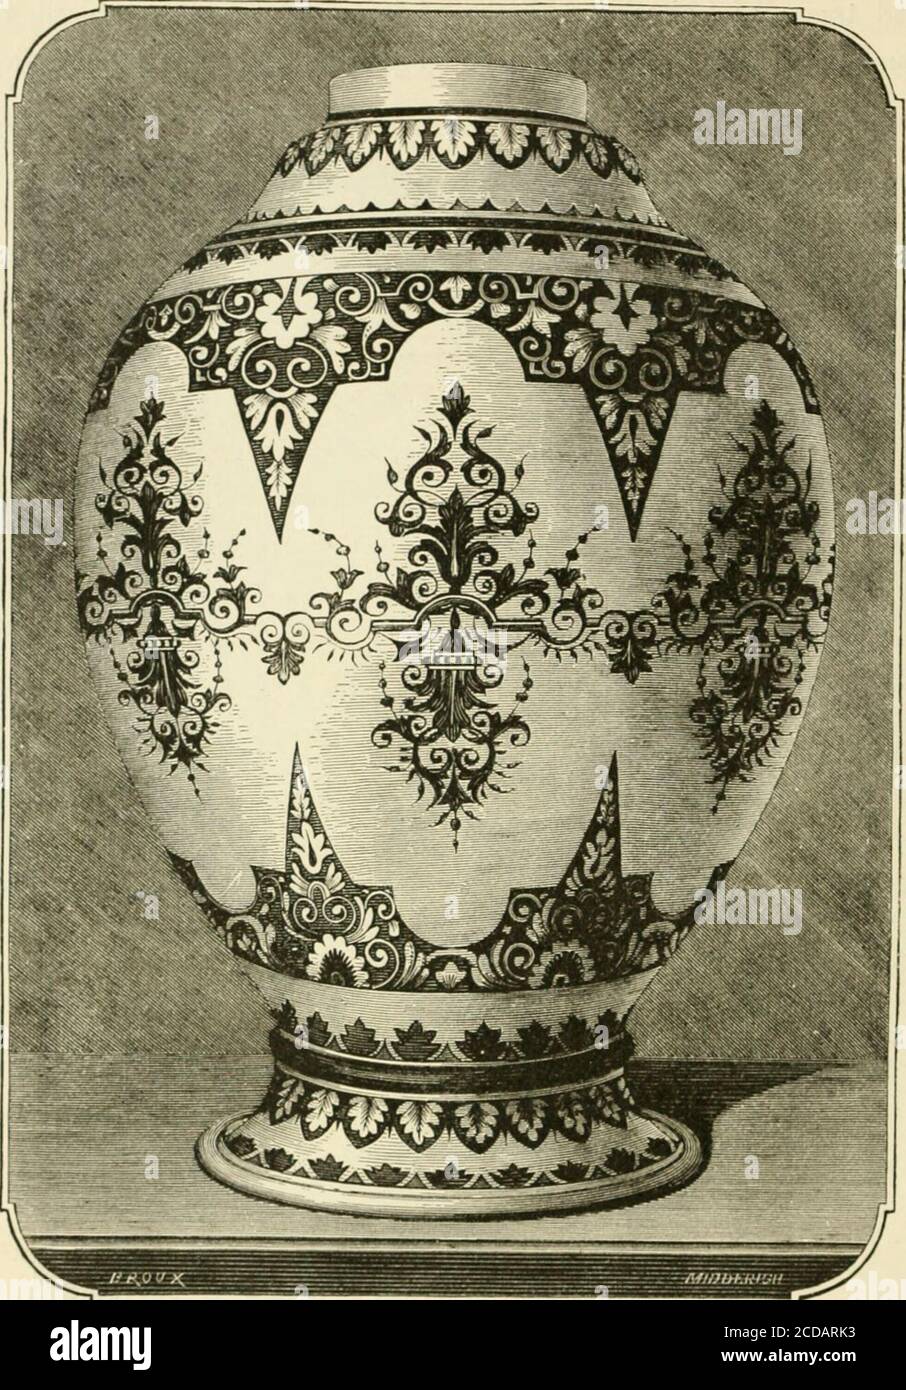 . Pottery and porcelain, from early times down to the Philadelphia exhibition of 1876 . Work was done for the table, some of ^vhich holds high rank. WhenLouis XIV. sent his silver to be minted in 1713, to pay for hisextravagant wars, he had it replaced by a service made at Rouen. 144 POTTERY AND PORCELAIN.. Fig. Si.—Rouen Faience. Some pieces in tlic Sevres Museum, in.nkcd witli the fleur-de-lis^ mayliavu l)elonfjed ti) tliis. ^[iiny of tlic lirli ainl tlic iioMl- followed liis example, and theresult was that a marvelous impulse was i^iveii lo the increase and theperfection of the faiences at Stock Photo